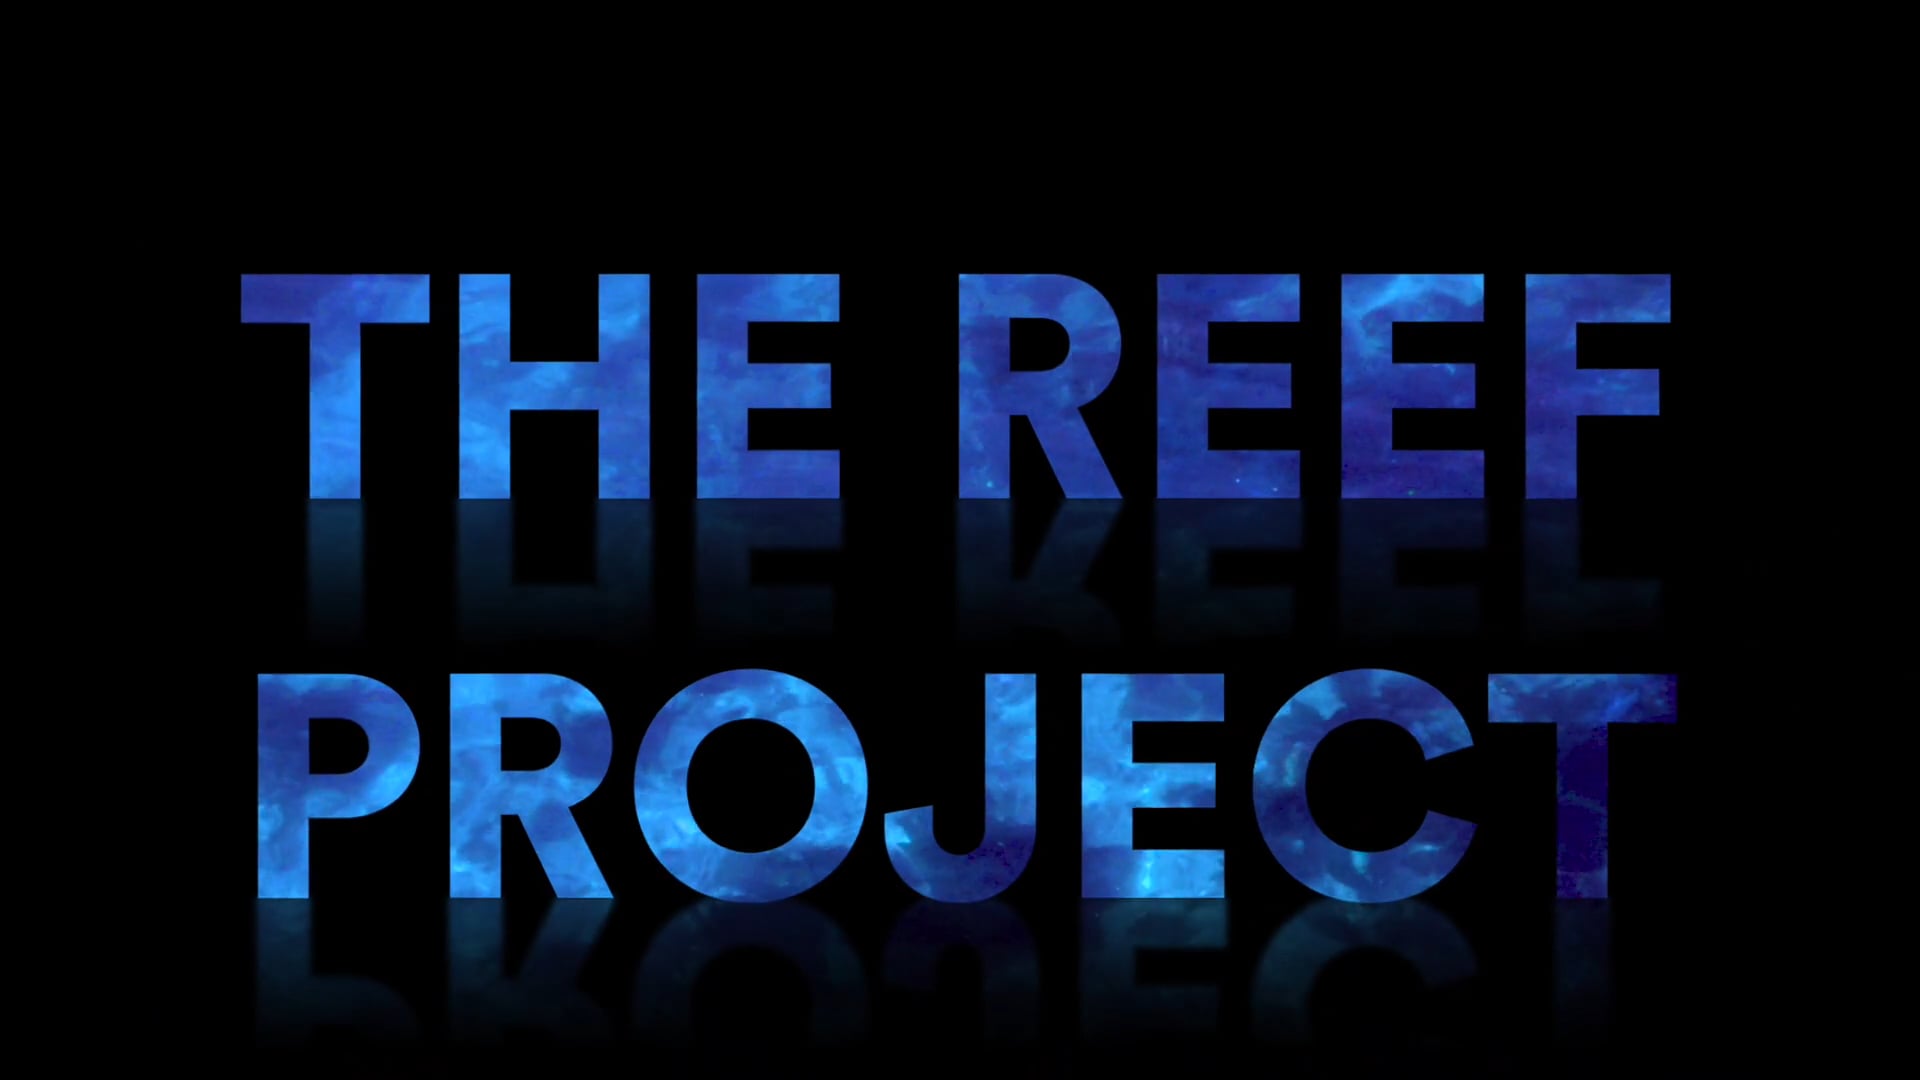 SOH Reef Project